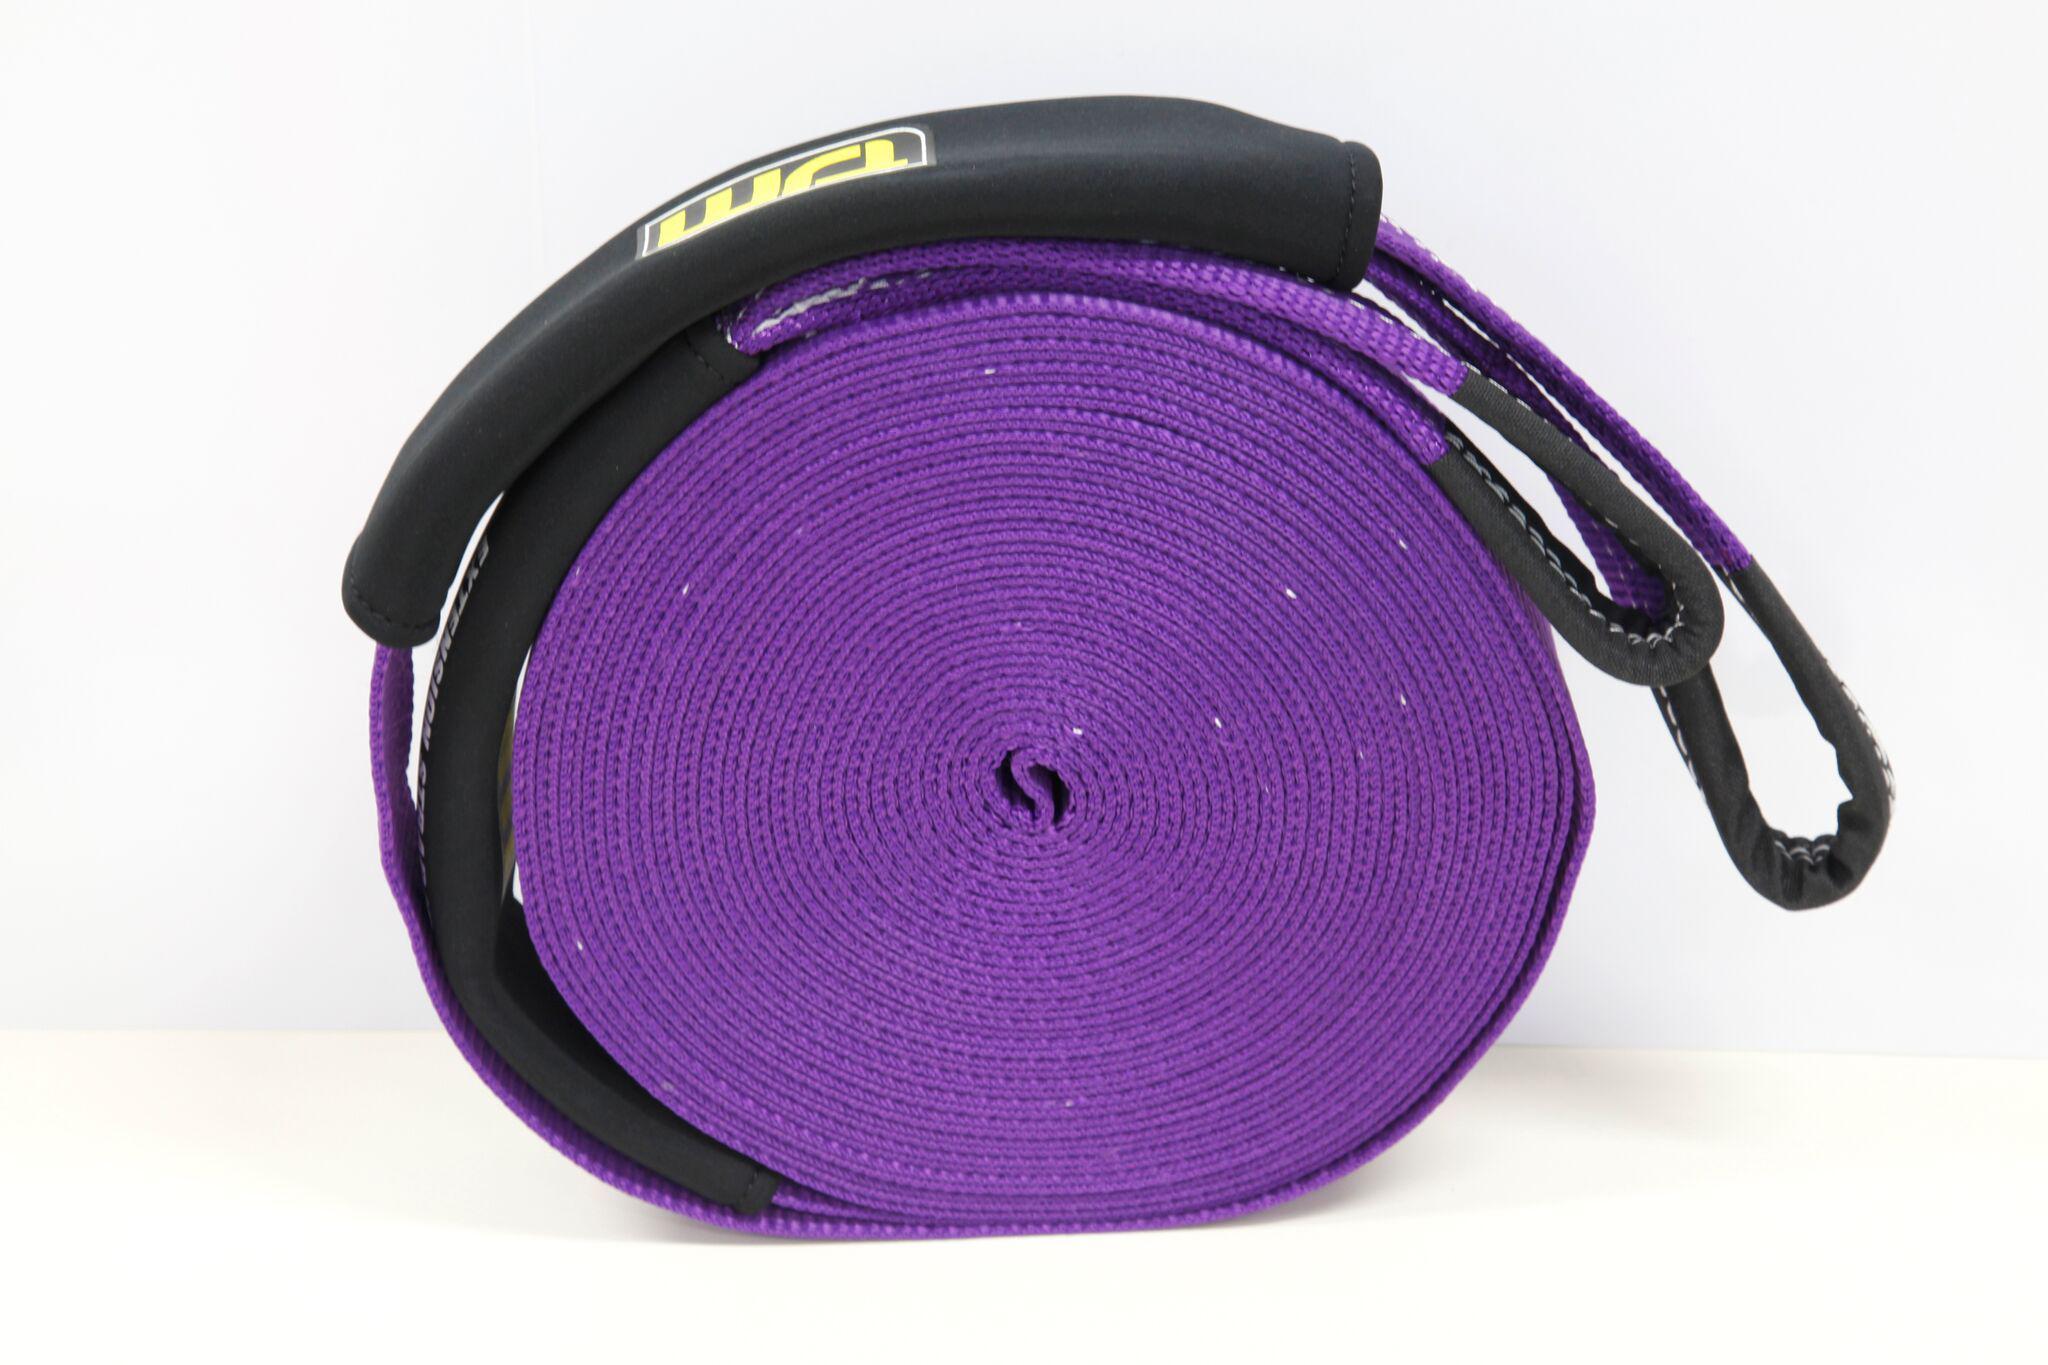 Winch Extension Strap - Purple, 20 Meters Long & 6,000 Kg (13,2000 Lbs) Strength Rating - by TJM